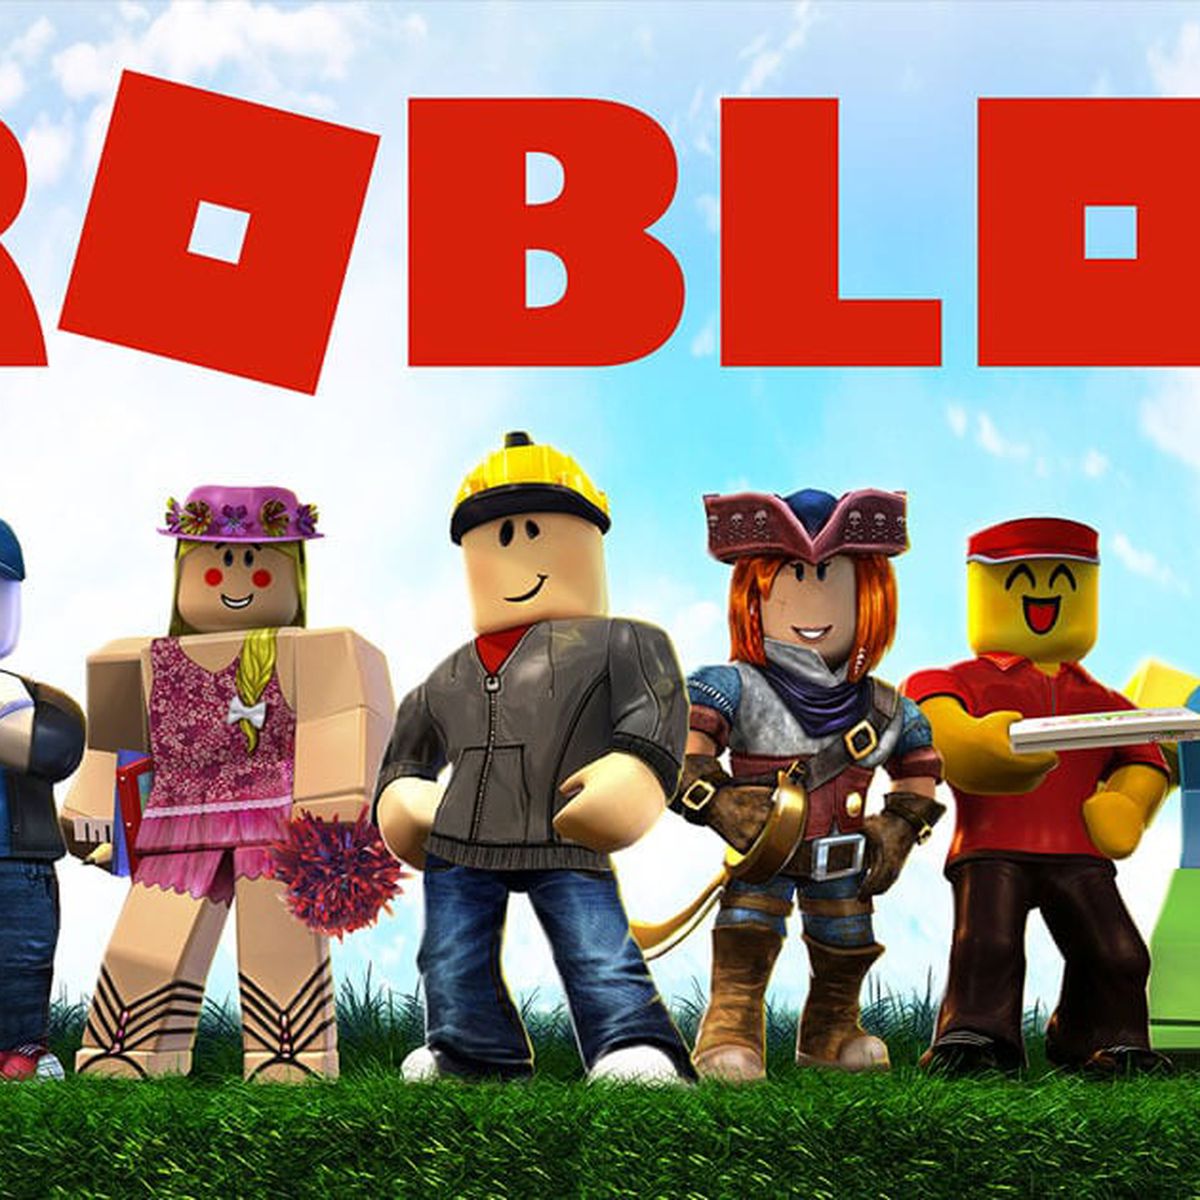 Department of Justice Exploring Apple's Treatment of 'Roblox' Game in Antitrust Investigation